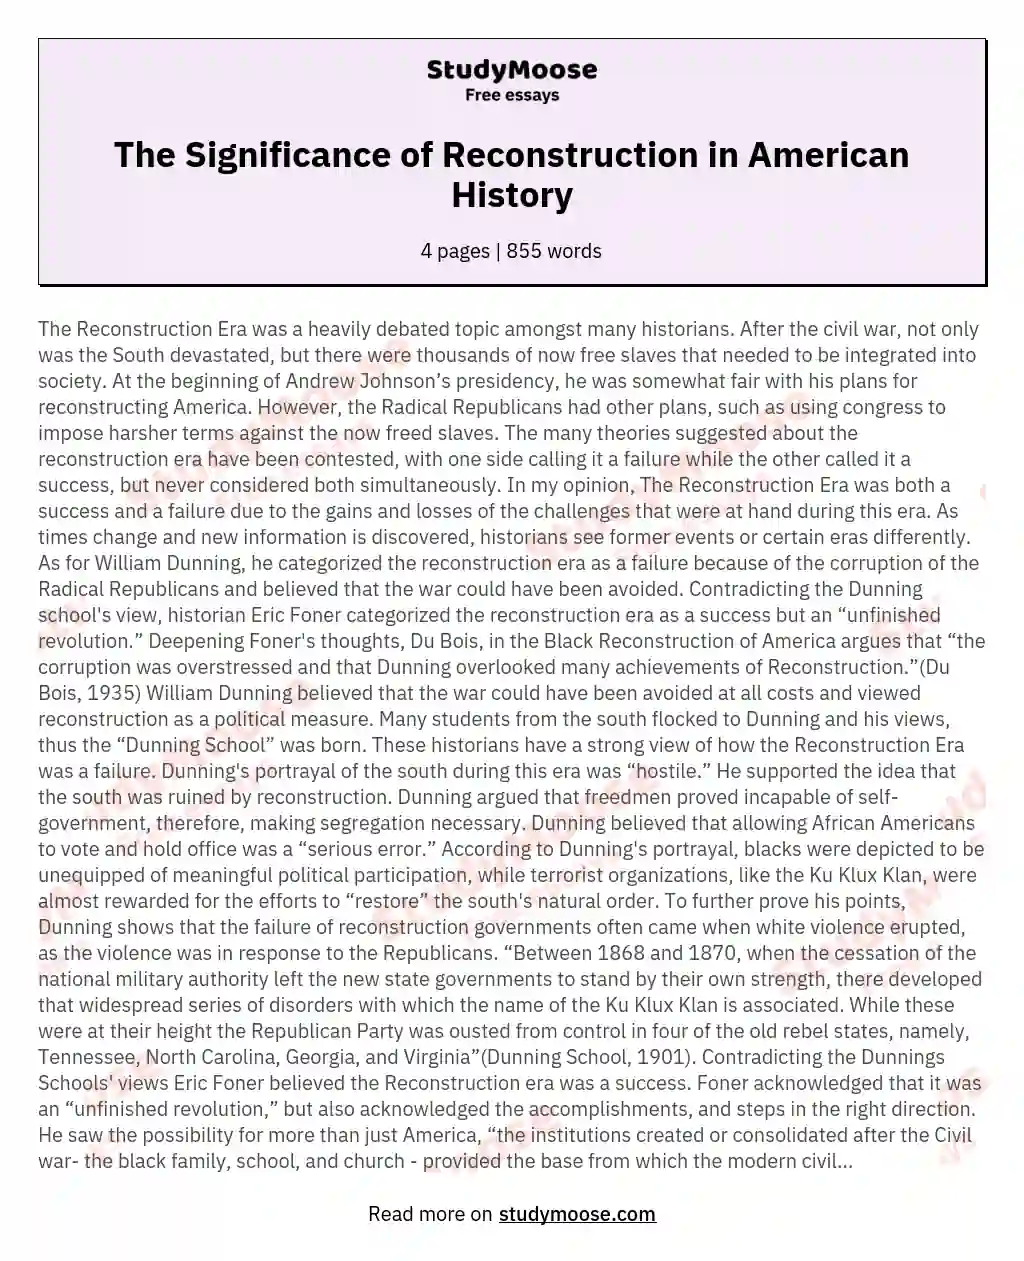 The Significance of Reconstruction in American History